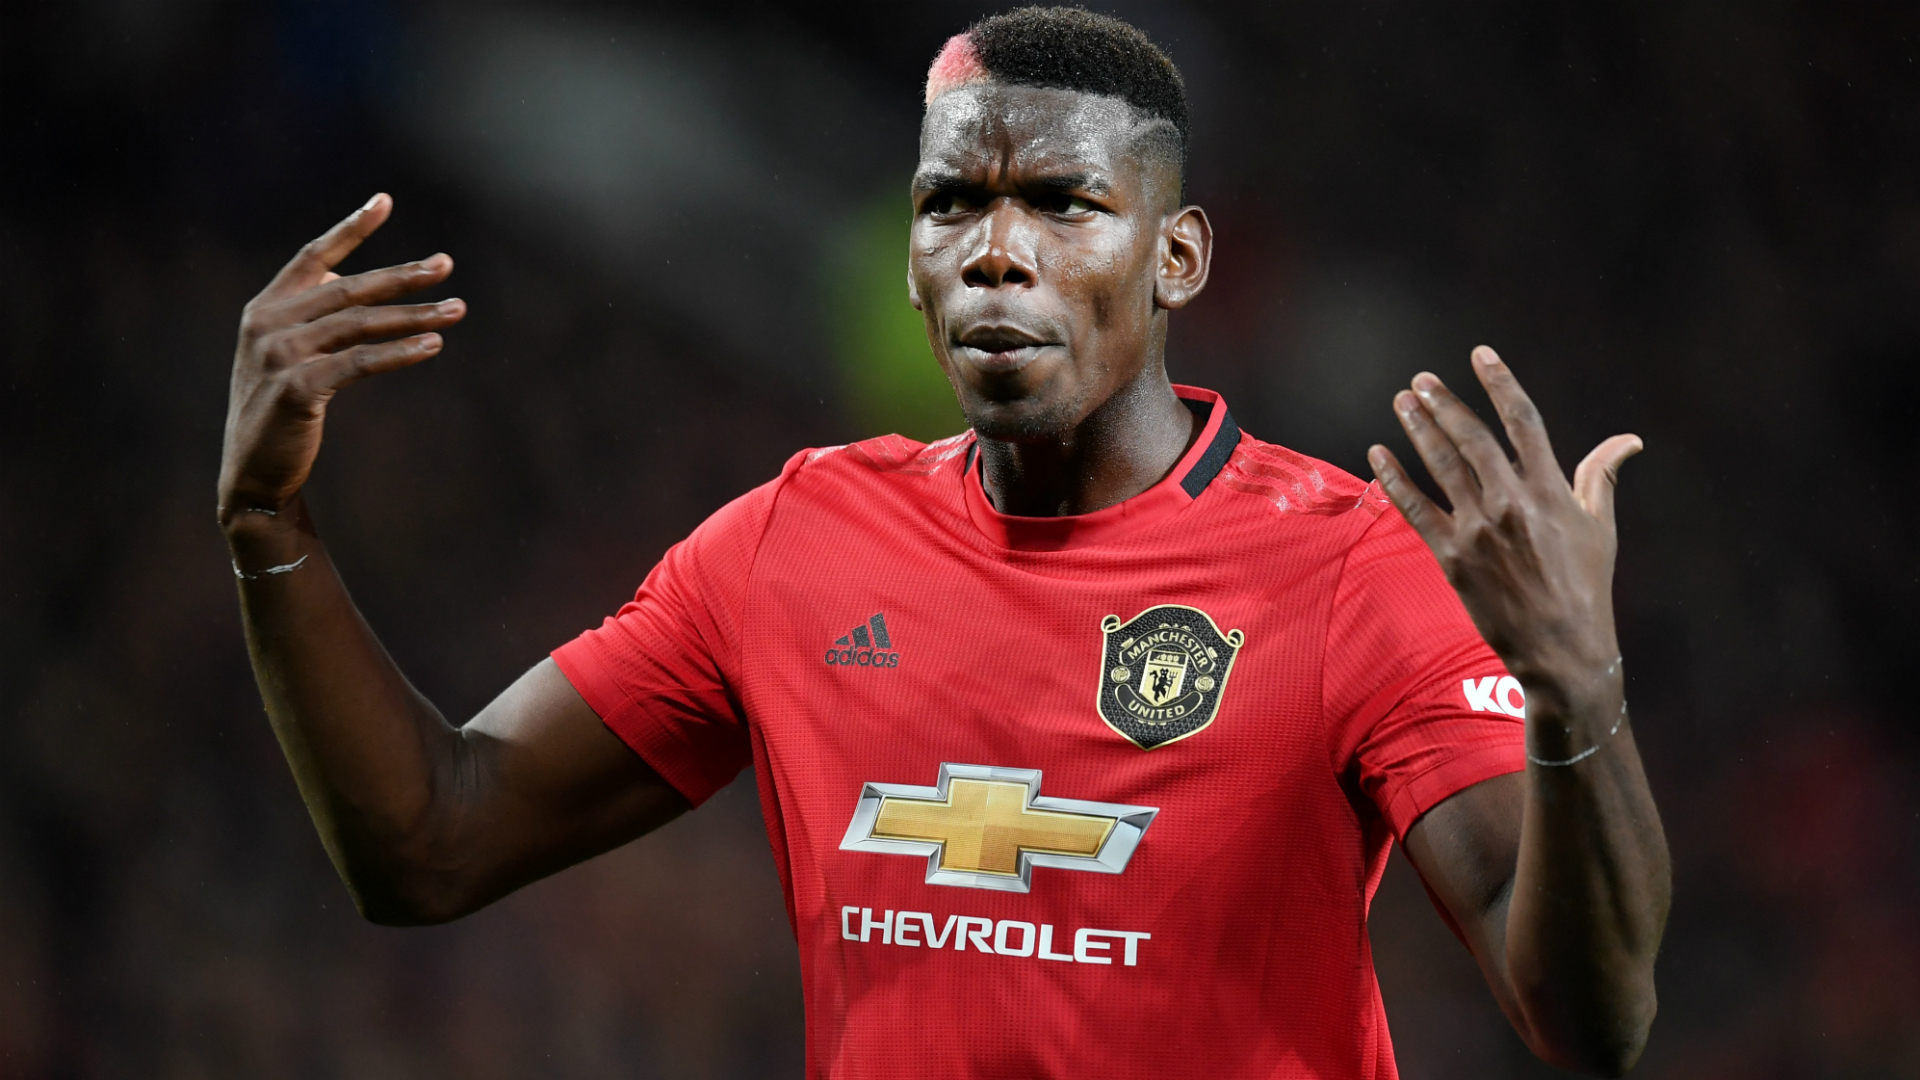 Ole Gunnar Solskjaer says he has "no problem at all" with Paul Pogba apparently meeting Zinedine Zidane.